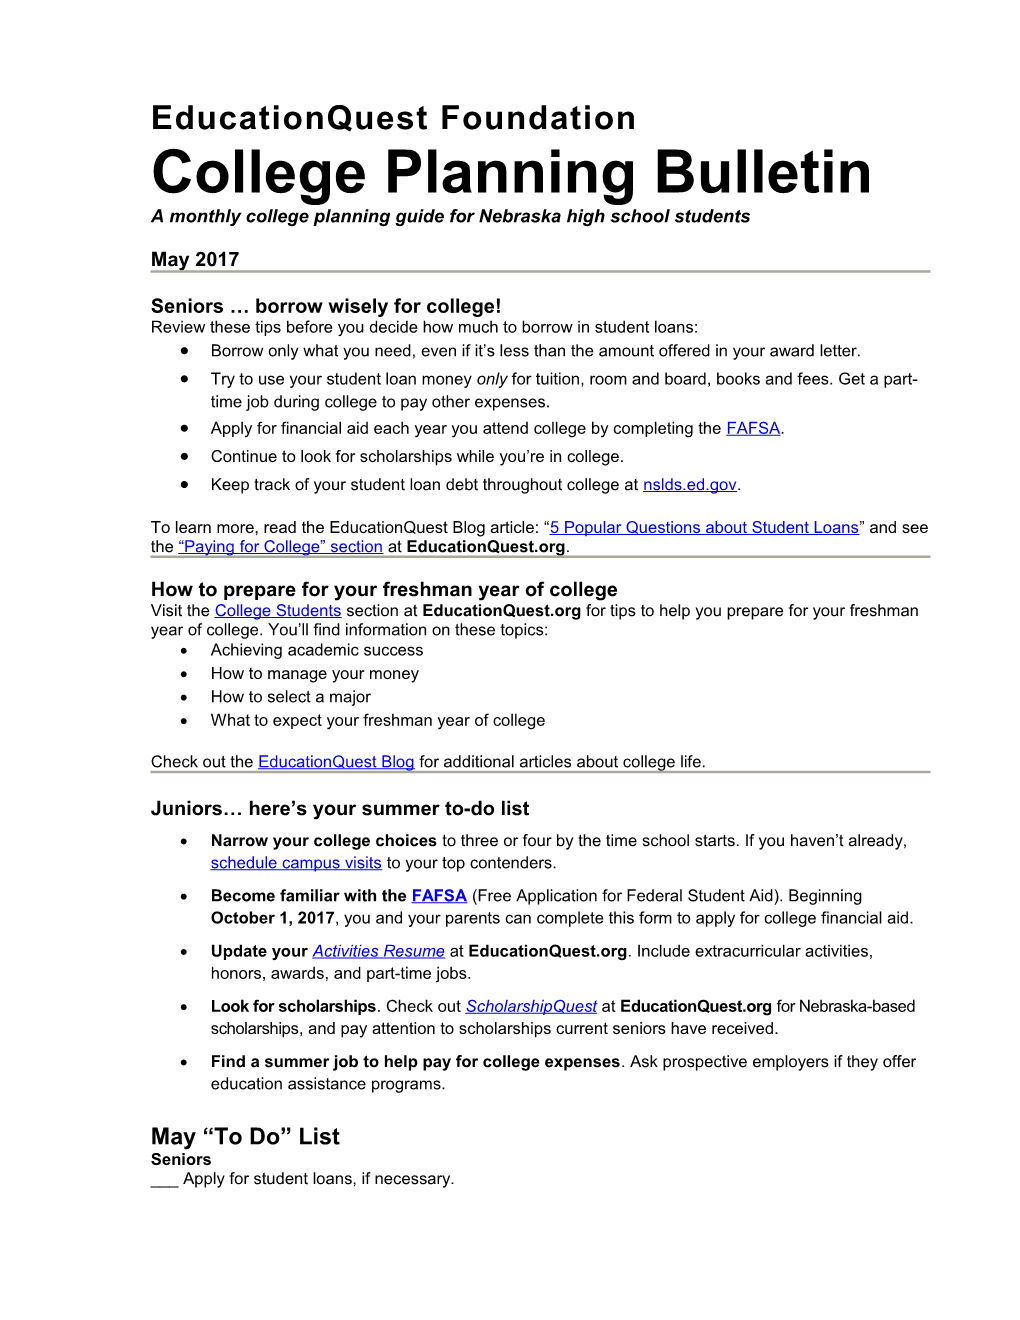 A Monthly College Planning Guide for Nebraska High School Students